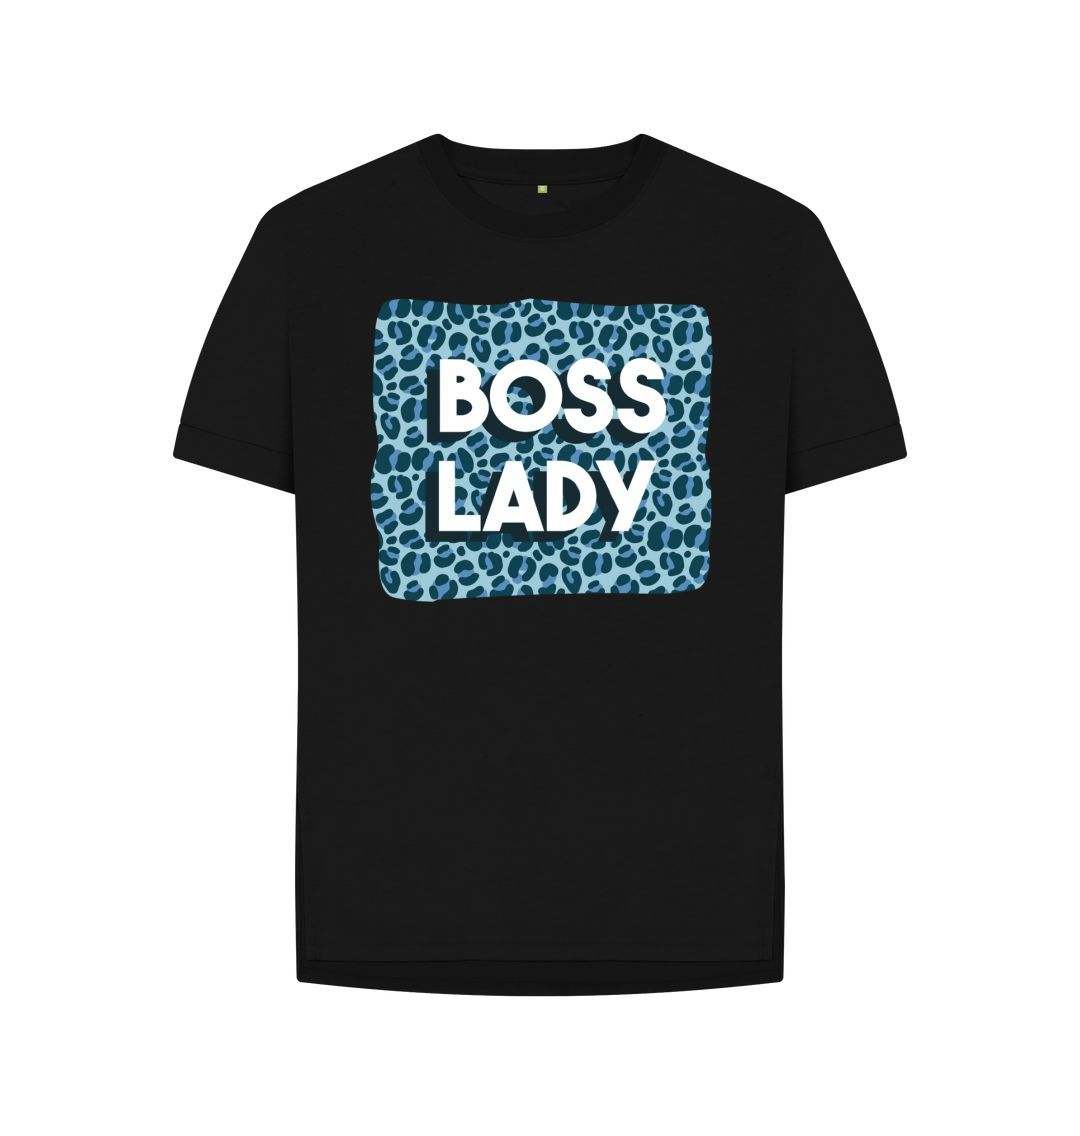 Black Boss Lady Women's Relaxed Fit Tee